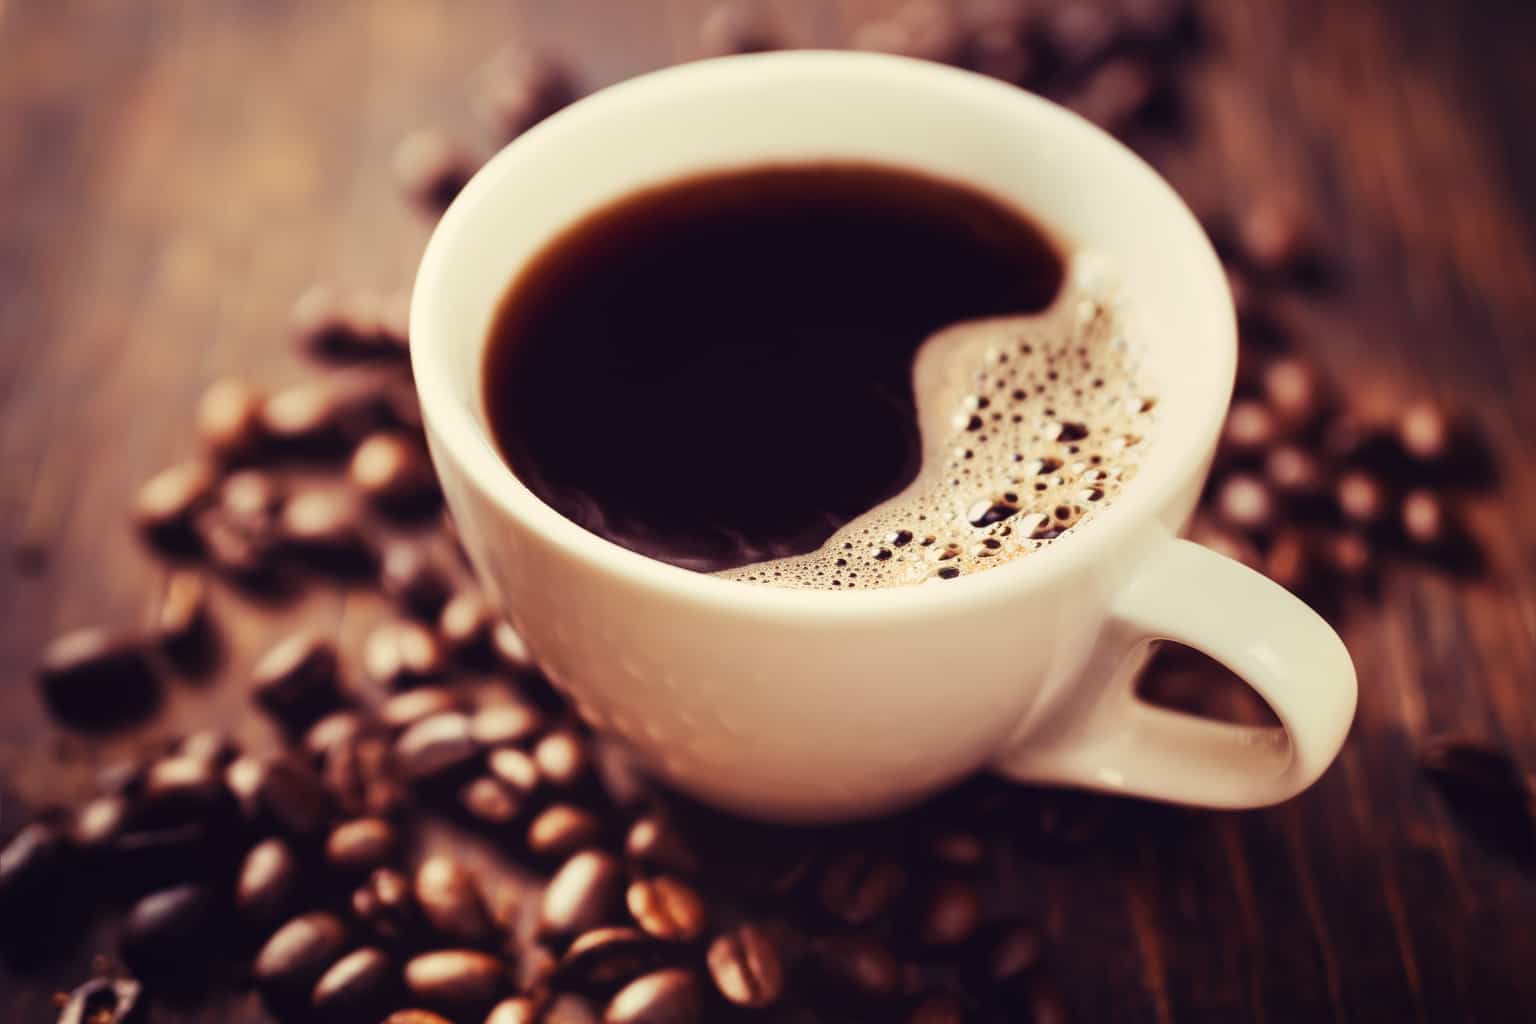 Drink more coffee to preserve your brain power